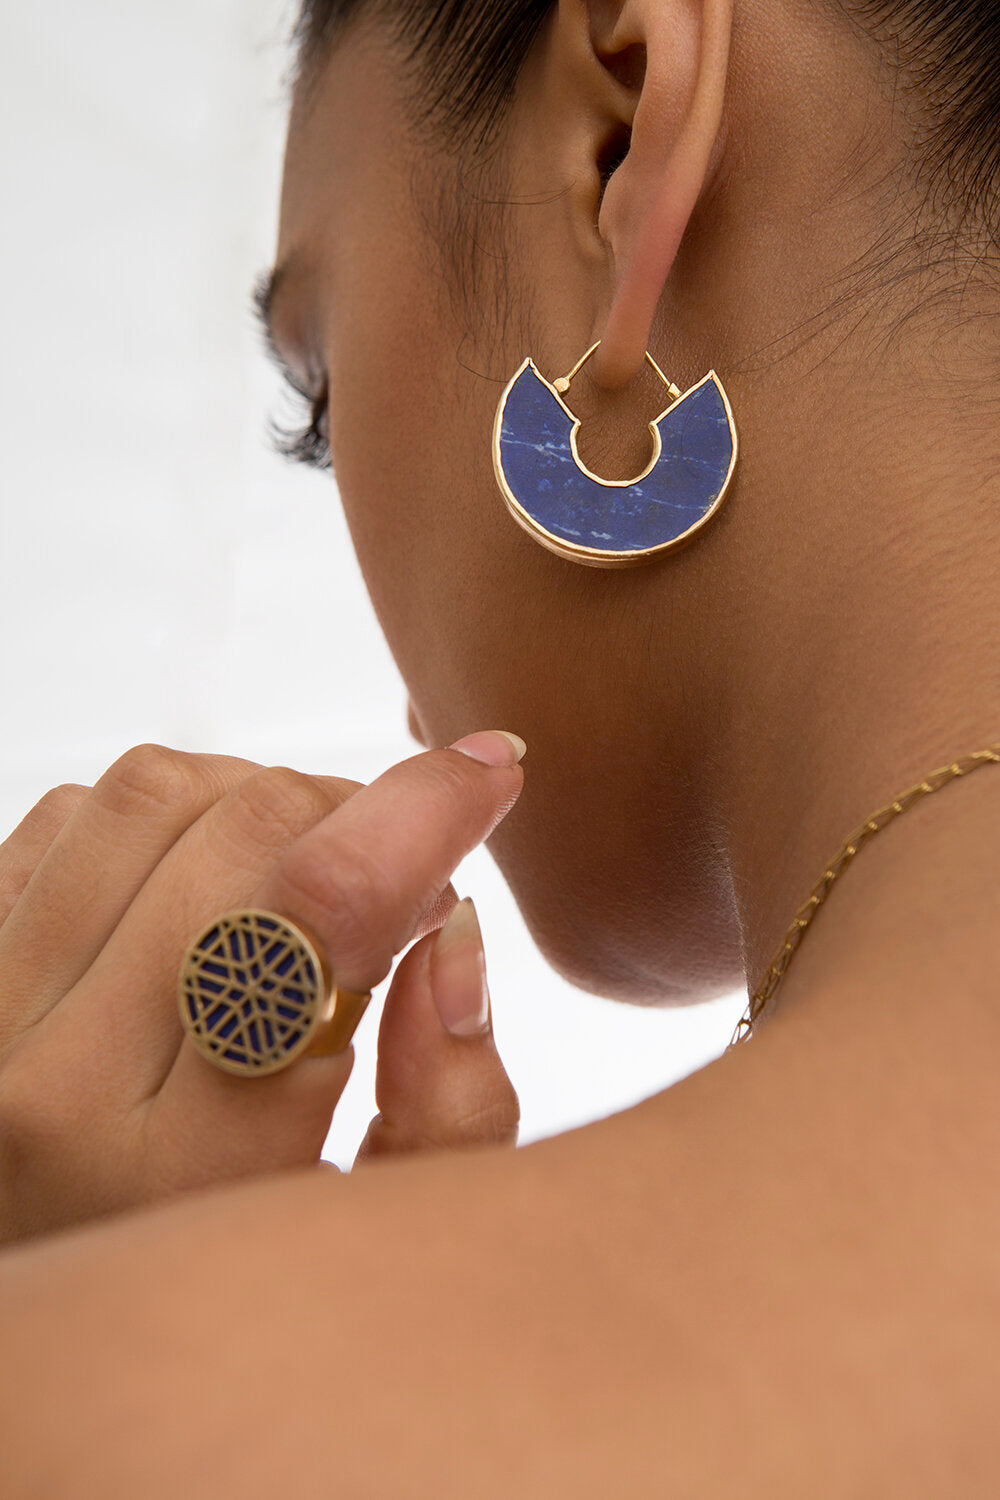 Artisan & Fox - Jewellery - JALI Signet Ring in Lapis Lazuli - Handcrafted in Afghanistan